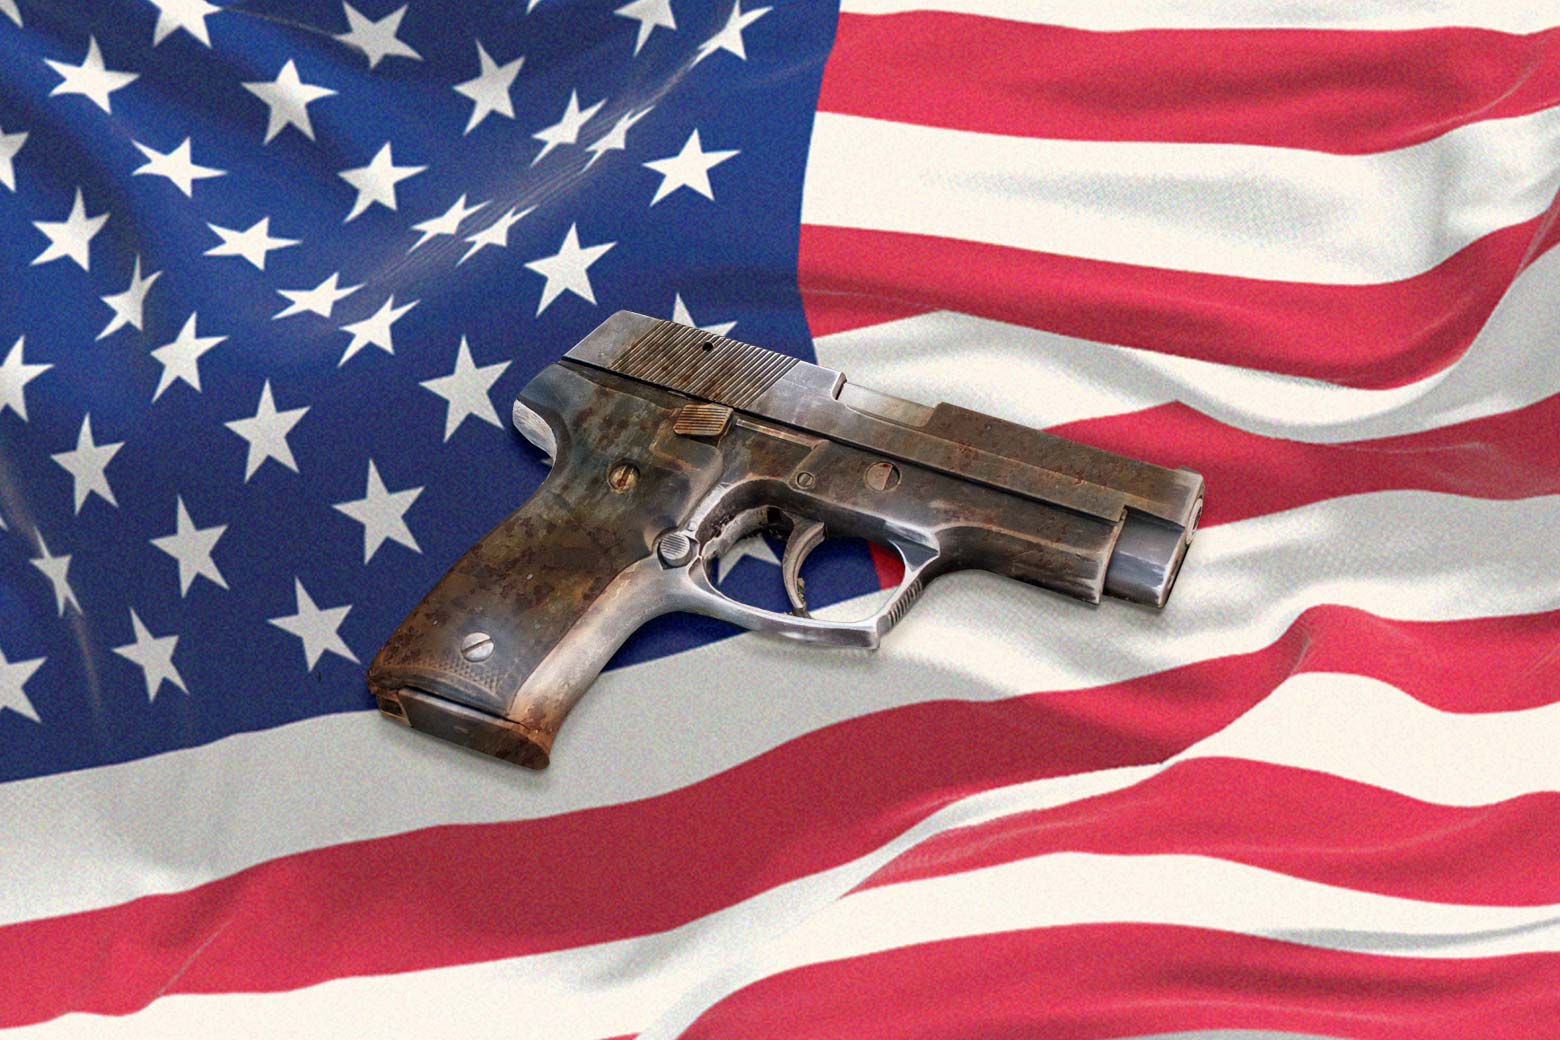 A dirty handgun rests on the American flag.